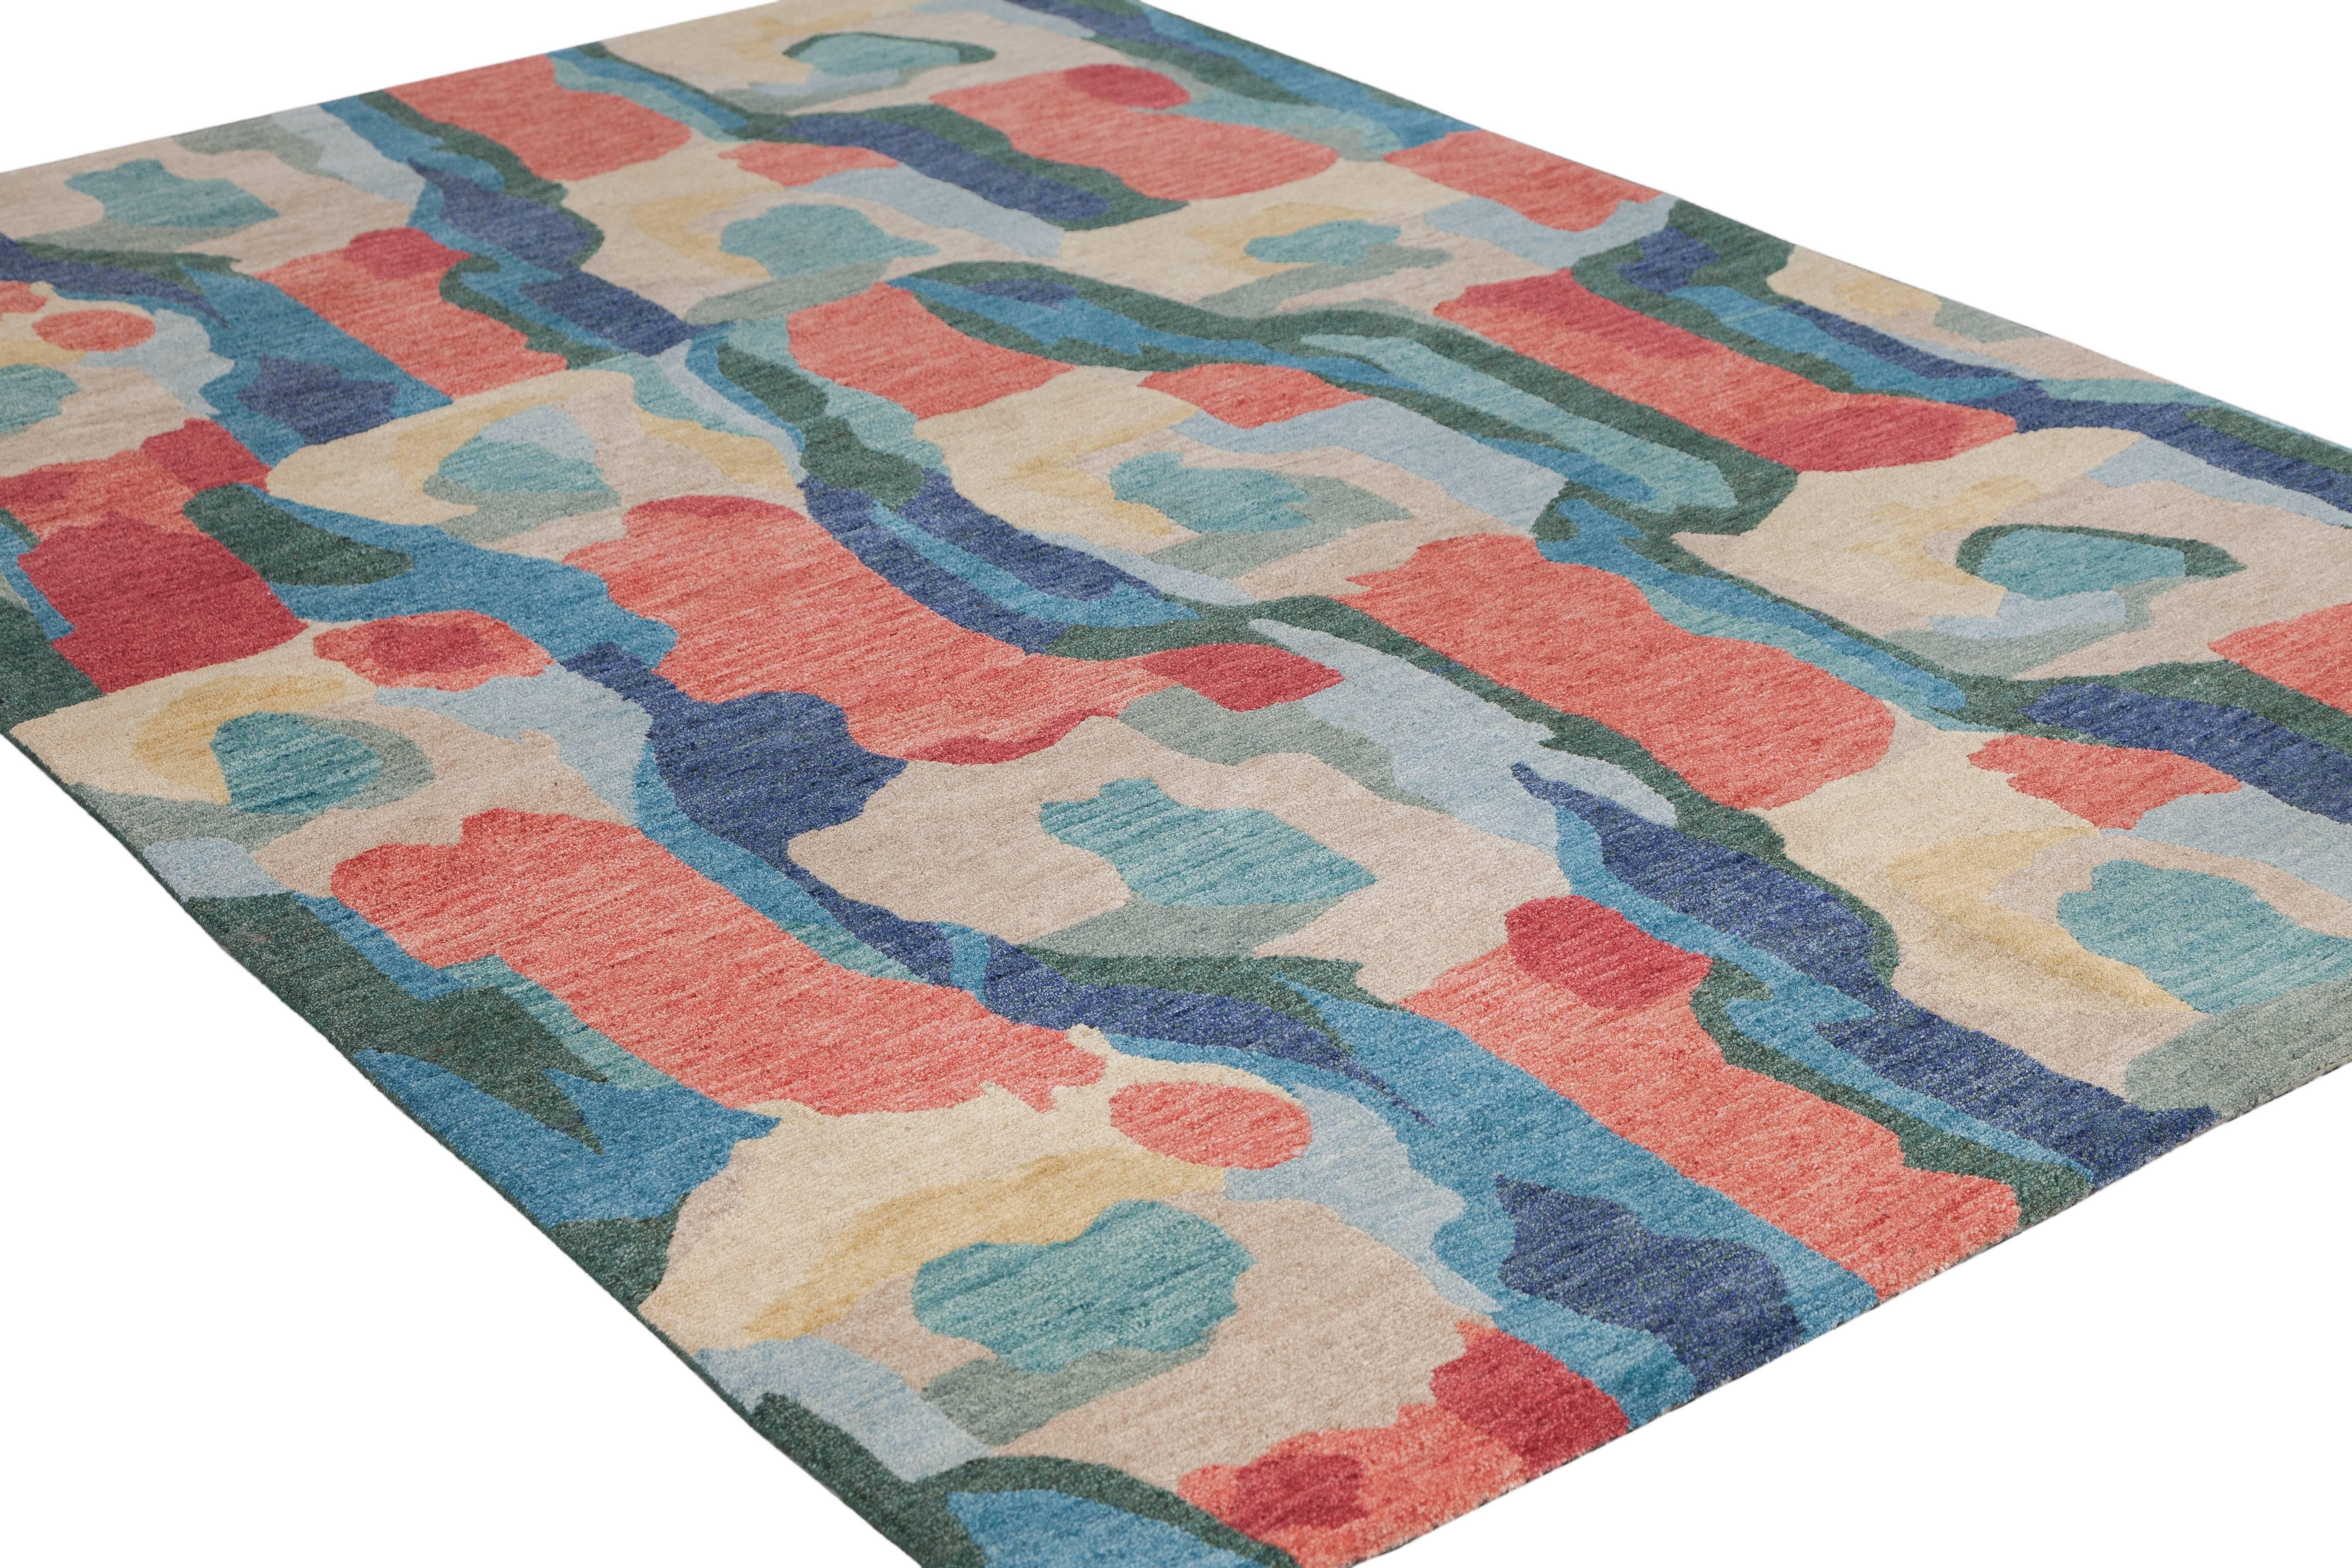 A expressionist backdrop of form and colors. Woven using pure Tibetan wool, this coloration features tones of khaki, marigold yellow, navy, teal, hunter green, sky blue and poppy red. This piece has been crafted by hand in our true 100 knot quality.